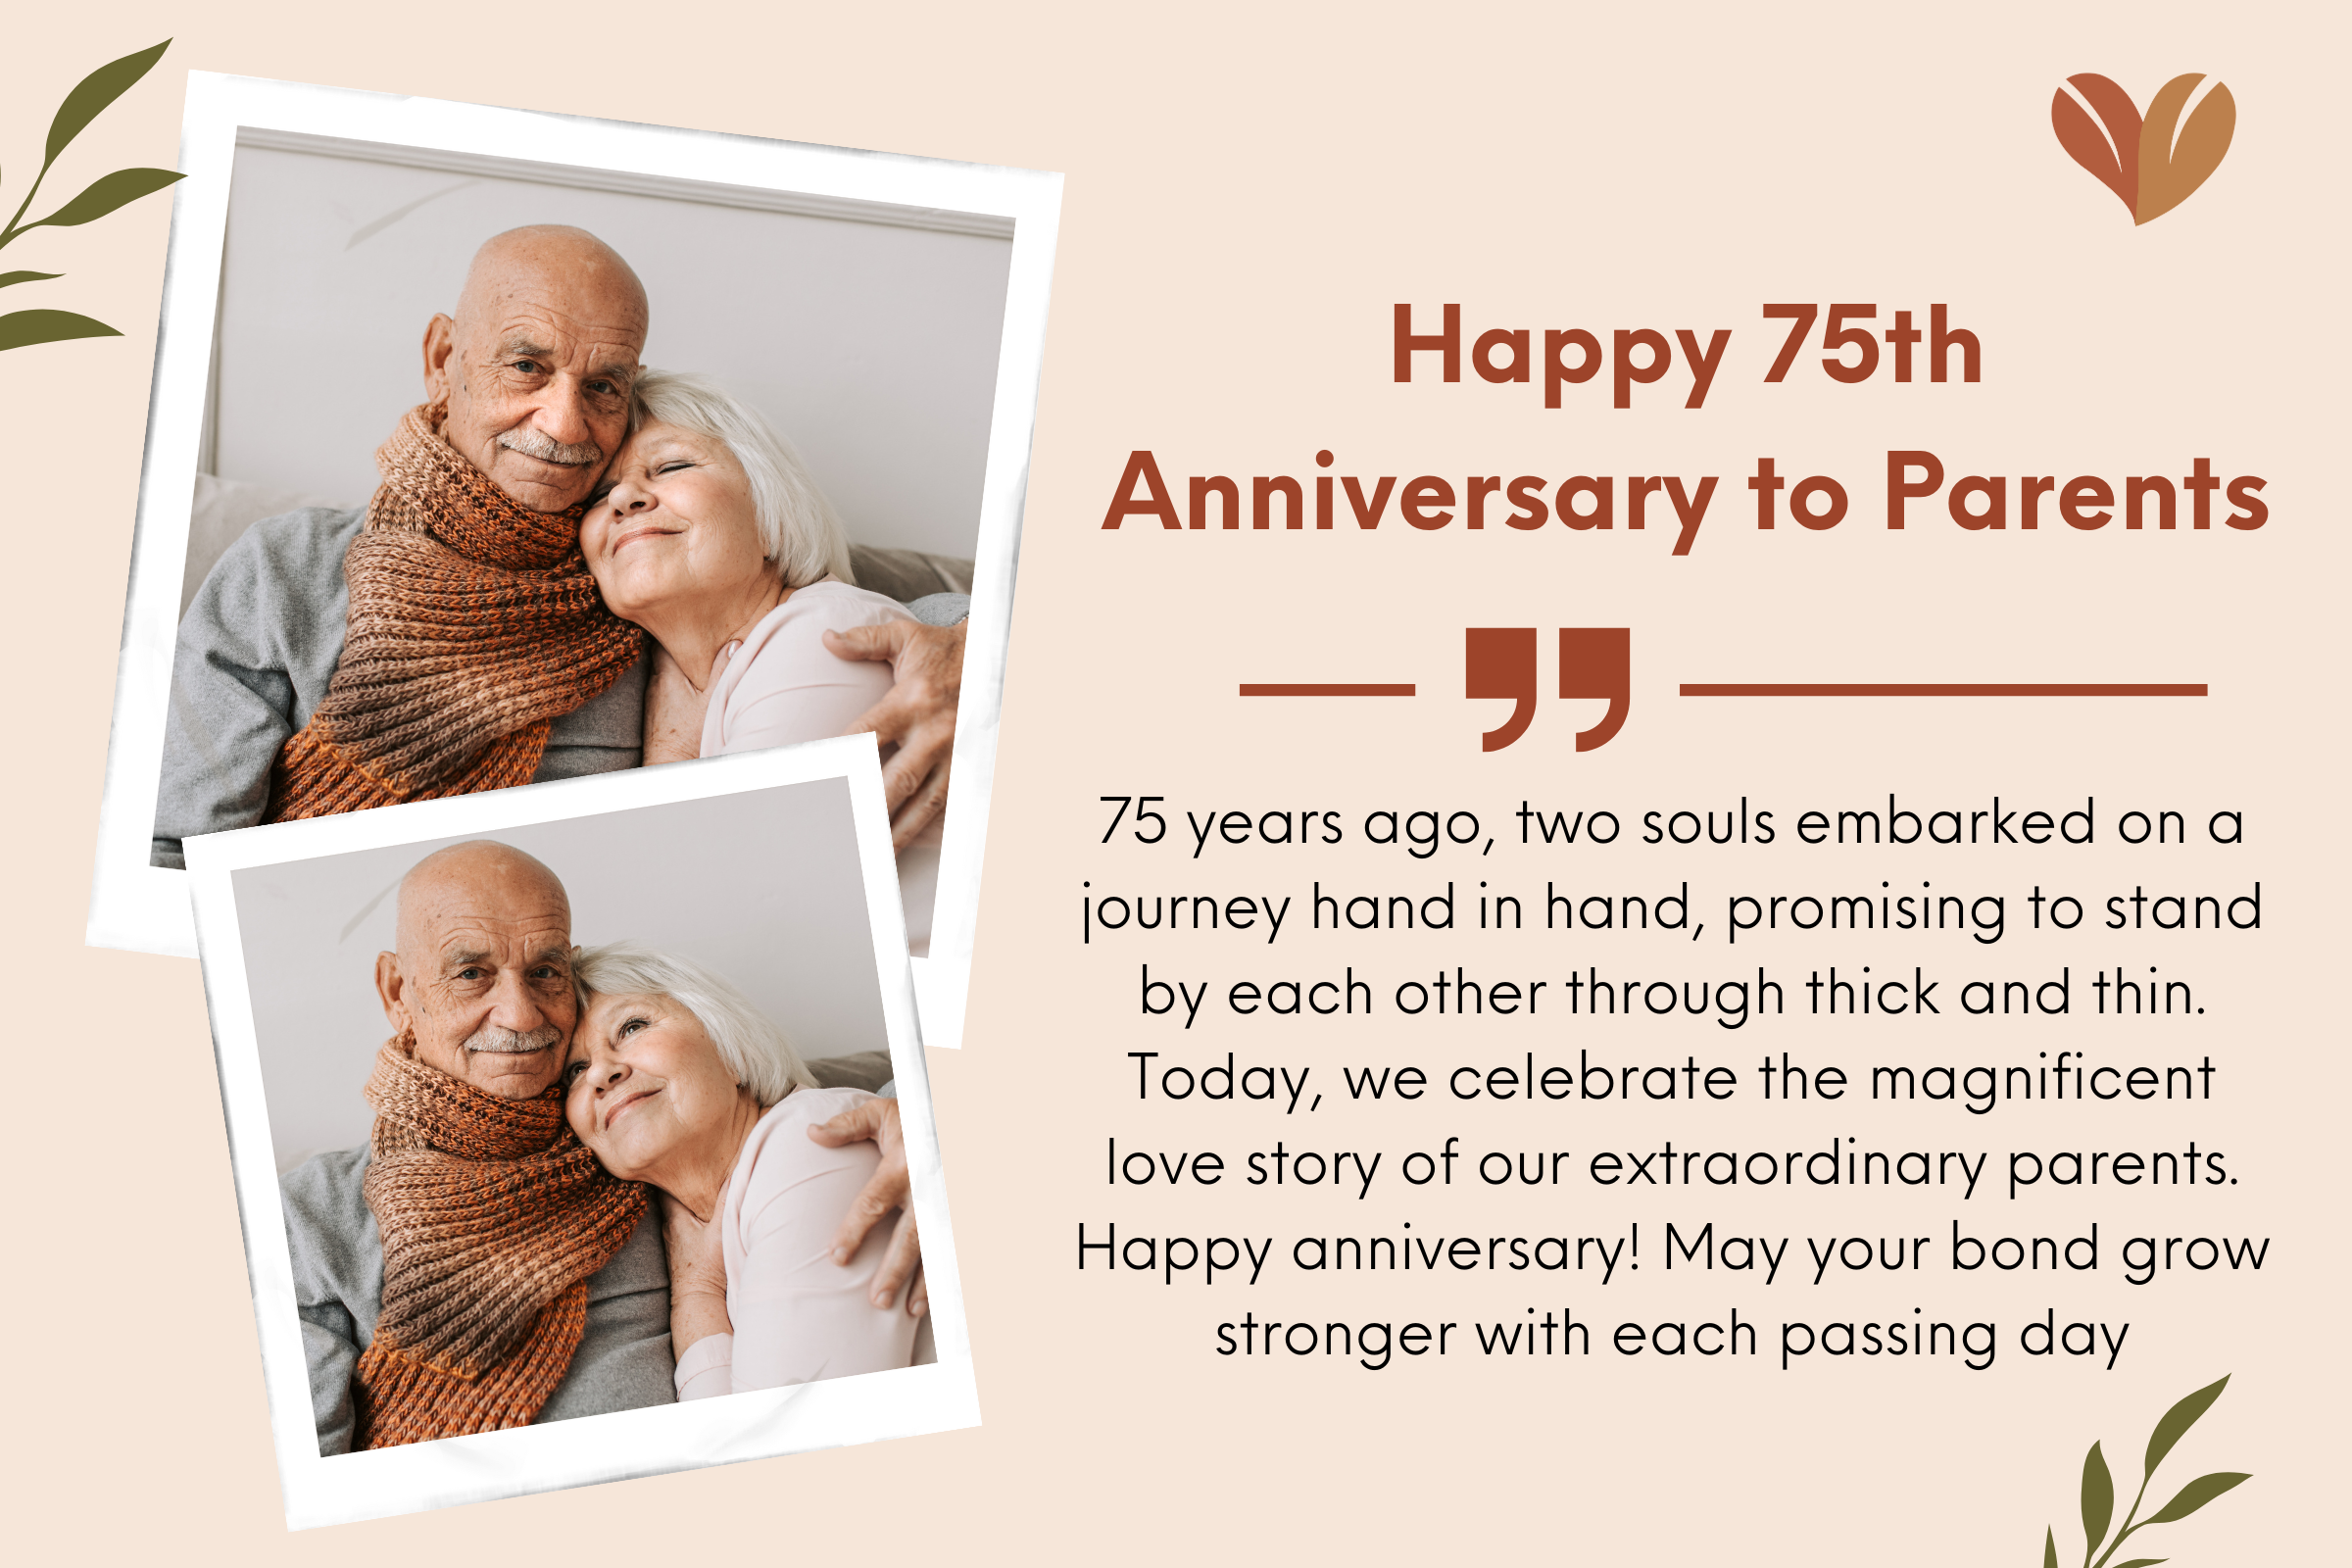 Sending love messages on the occasion of parents' 75th anniversary